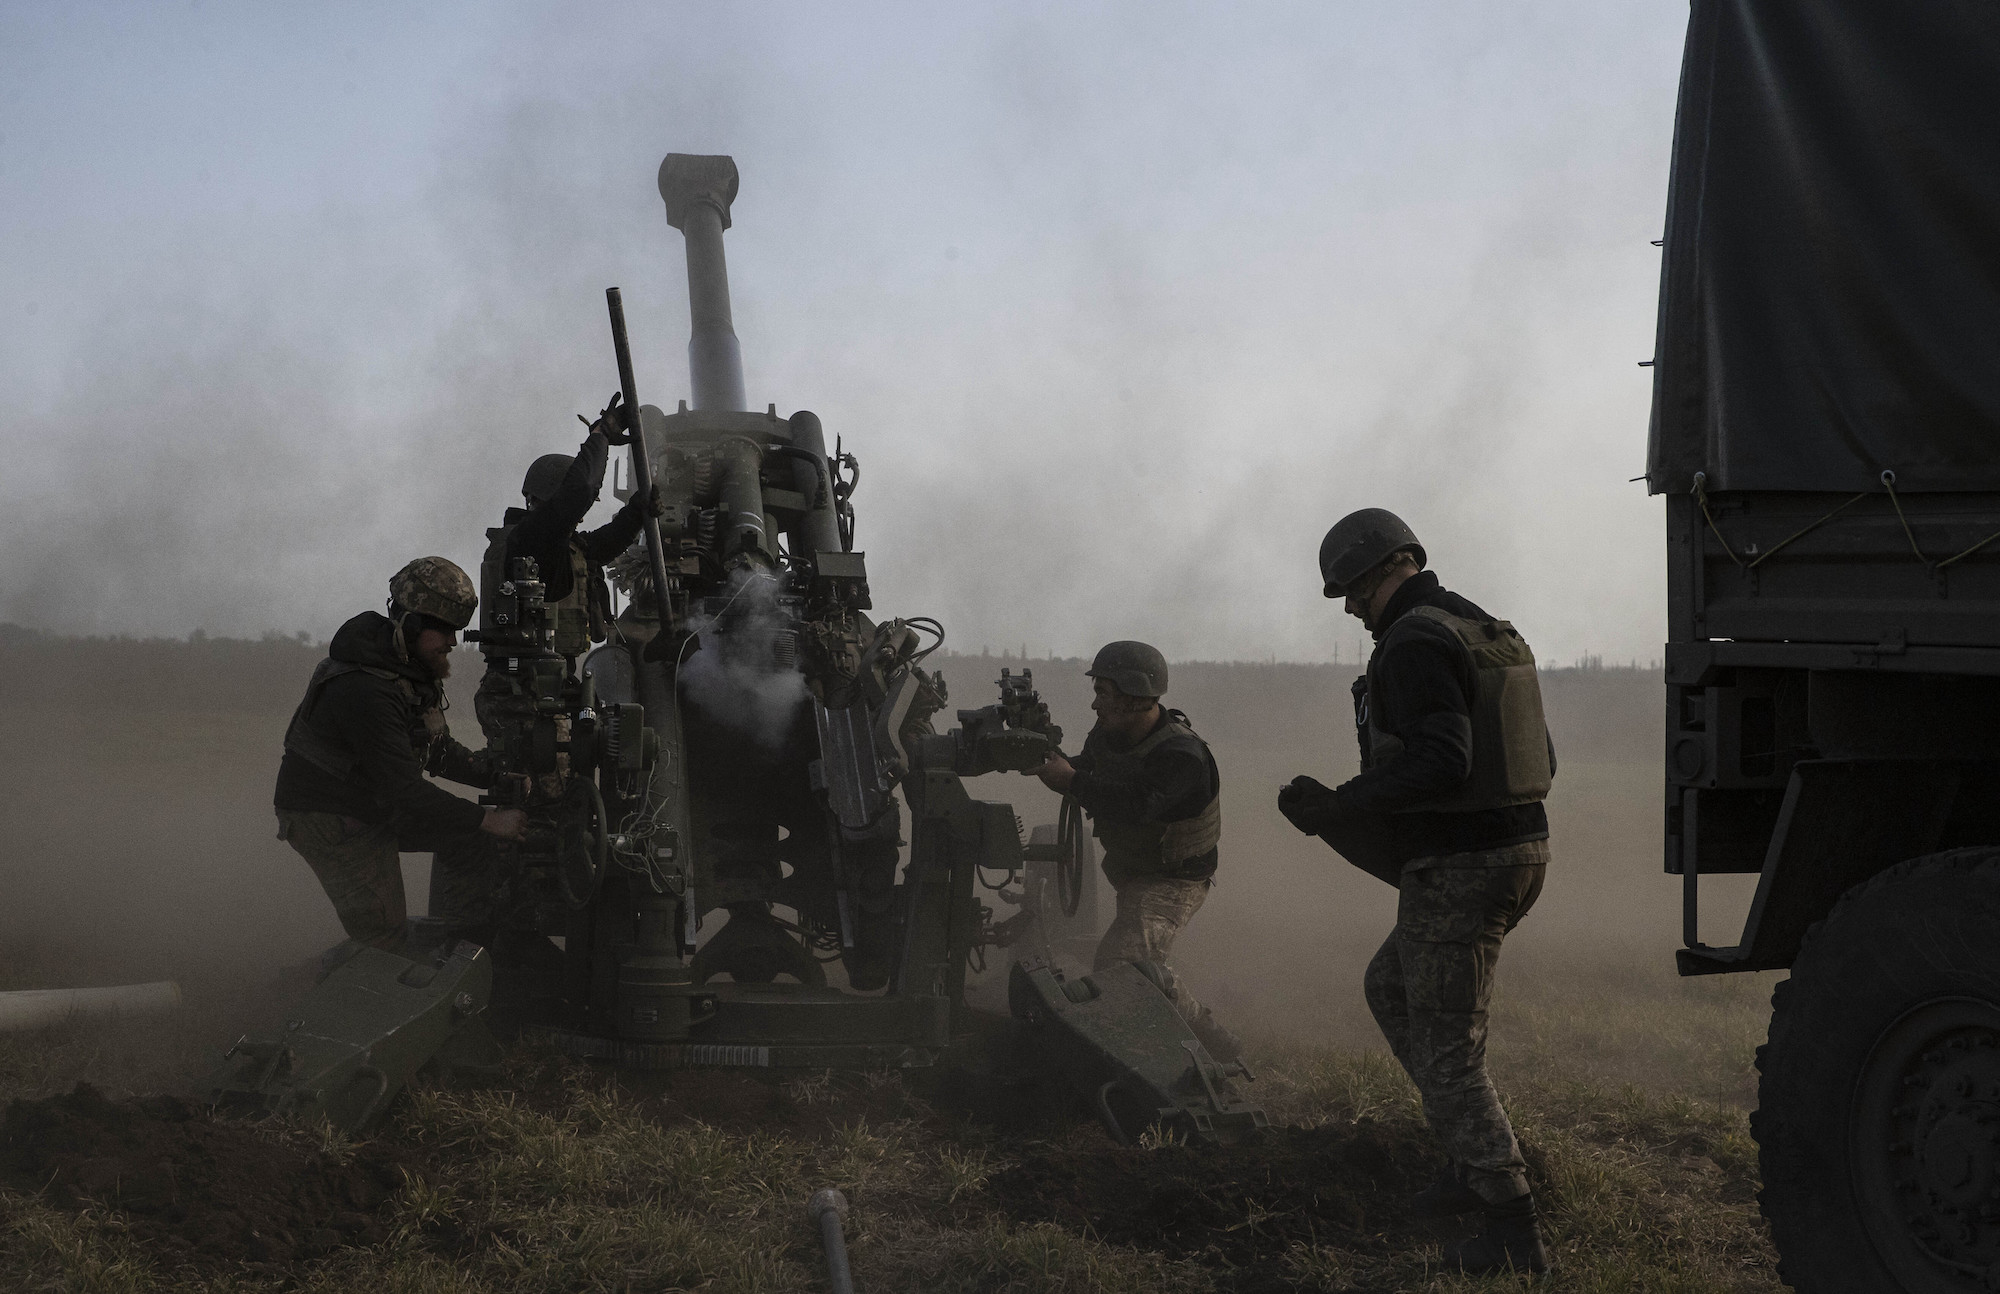 A Ukrainian artillery battery attached to the 59th Mechanized Brigade, fires towards Russian forces in Kherson Oblast on Saturday.